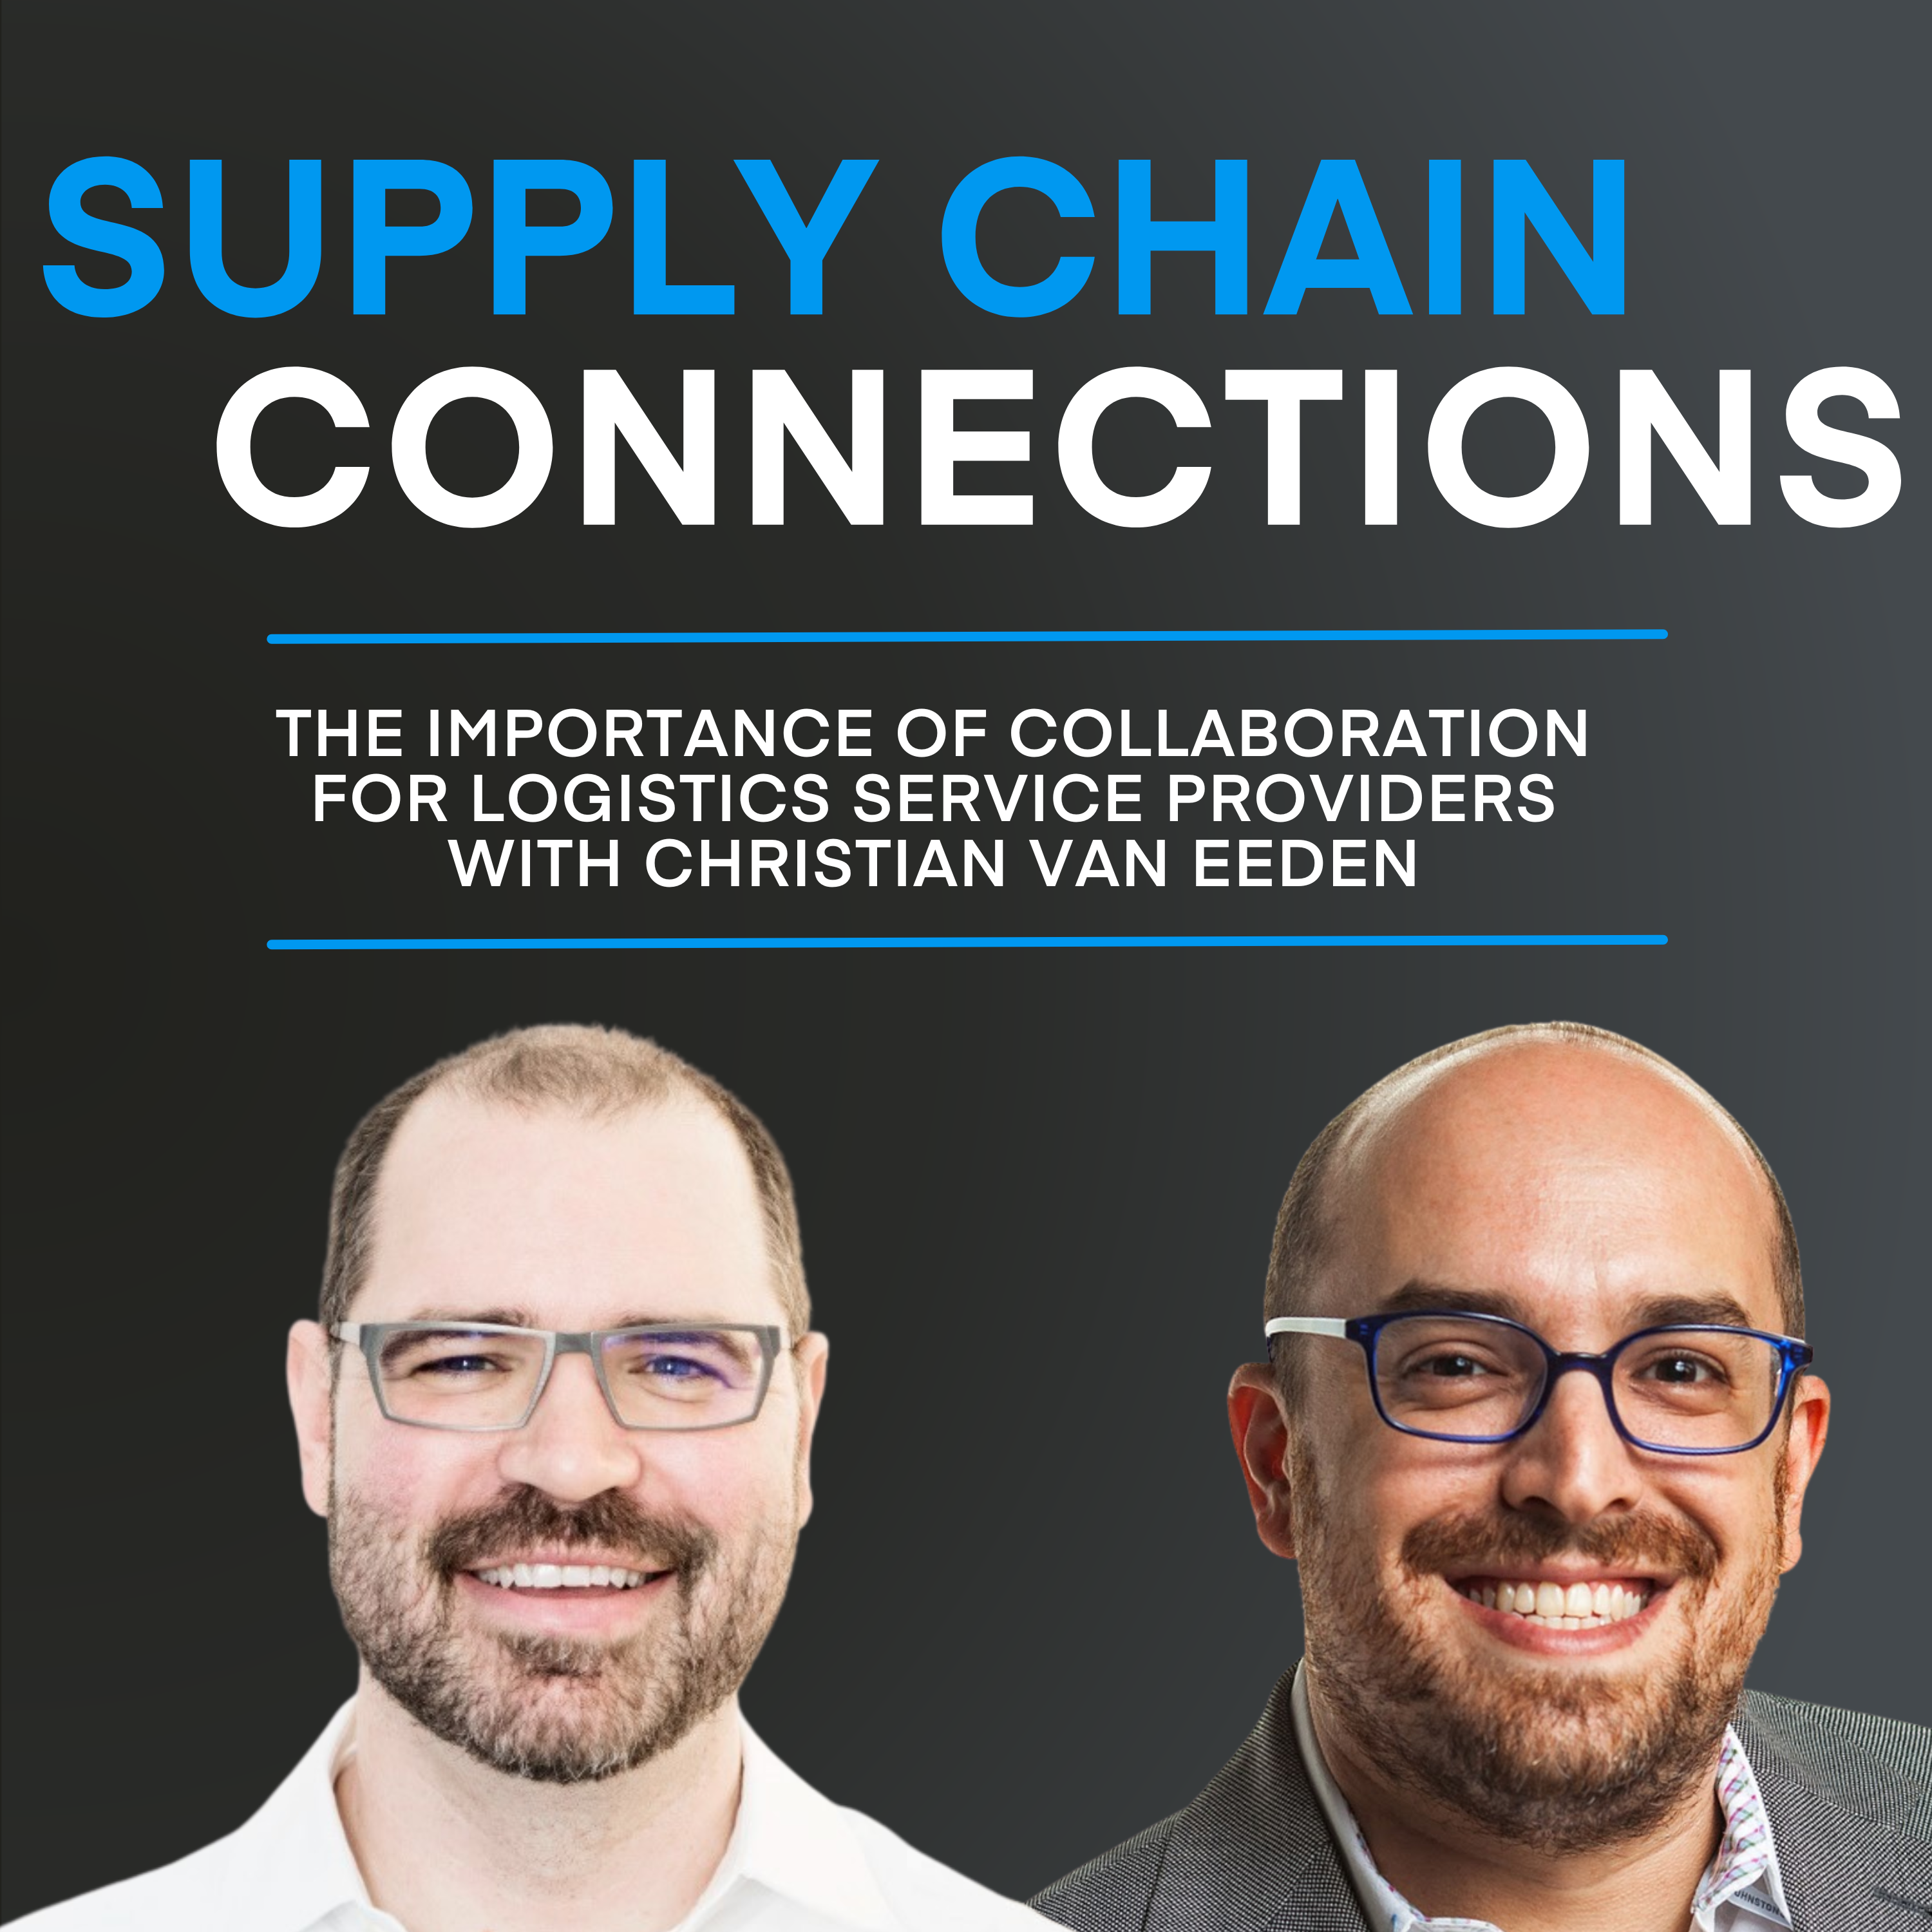 The Importance of Collaboration for Logistics Service Providers with Christian van Eeden